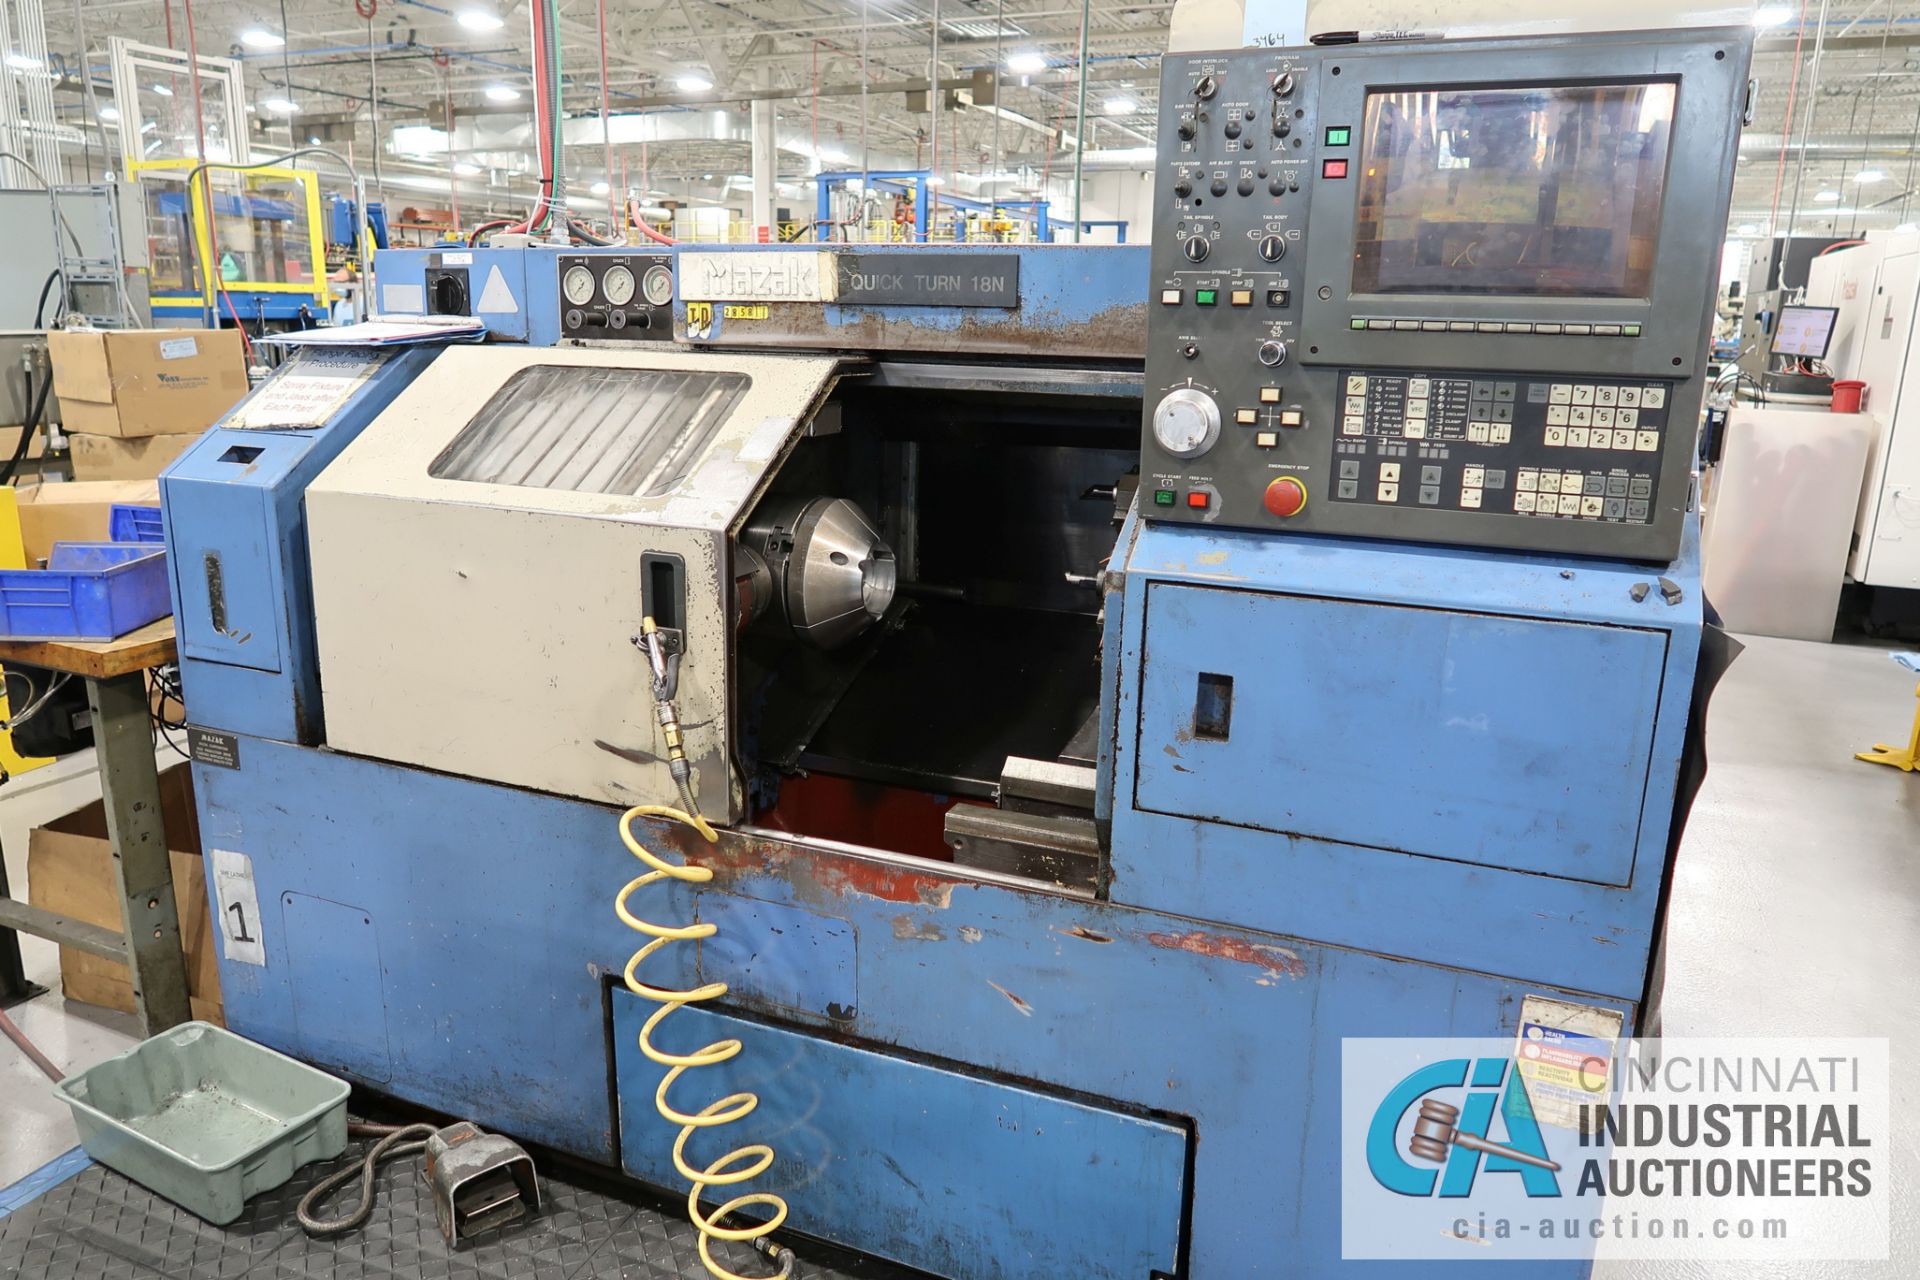 **MAZAK MODEL QUICK TURN 18N CNC TURNING CENTER; **Out of Service - Encoder Issue **